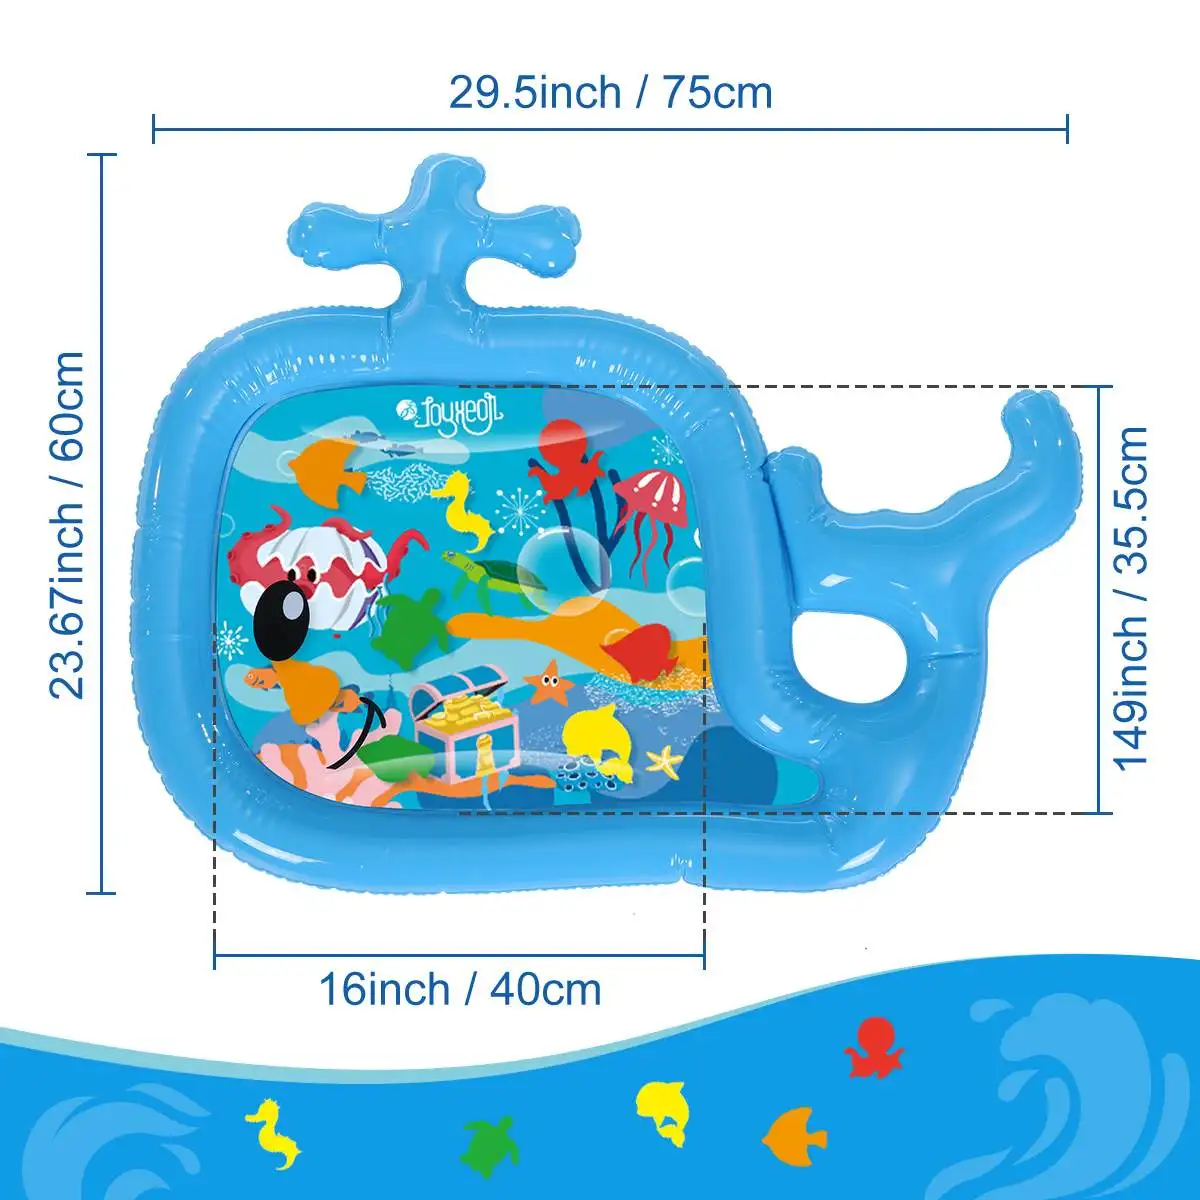 Flatable cushion infant toddler water play mat summer toys for children early education thumb200